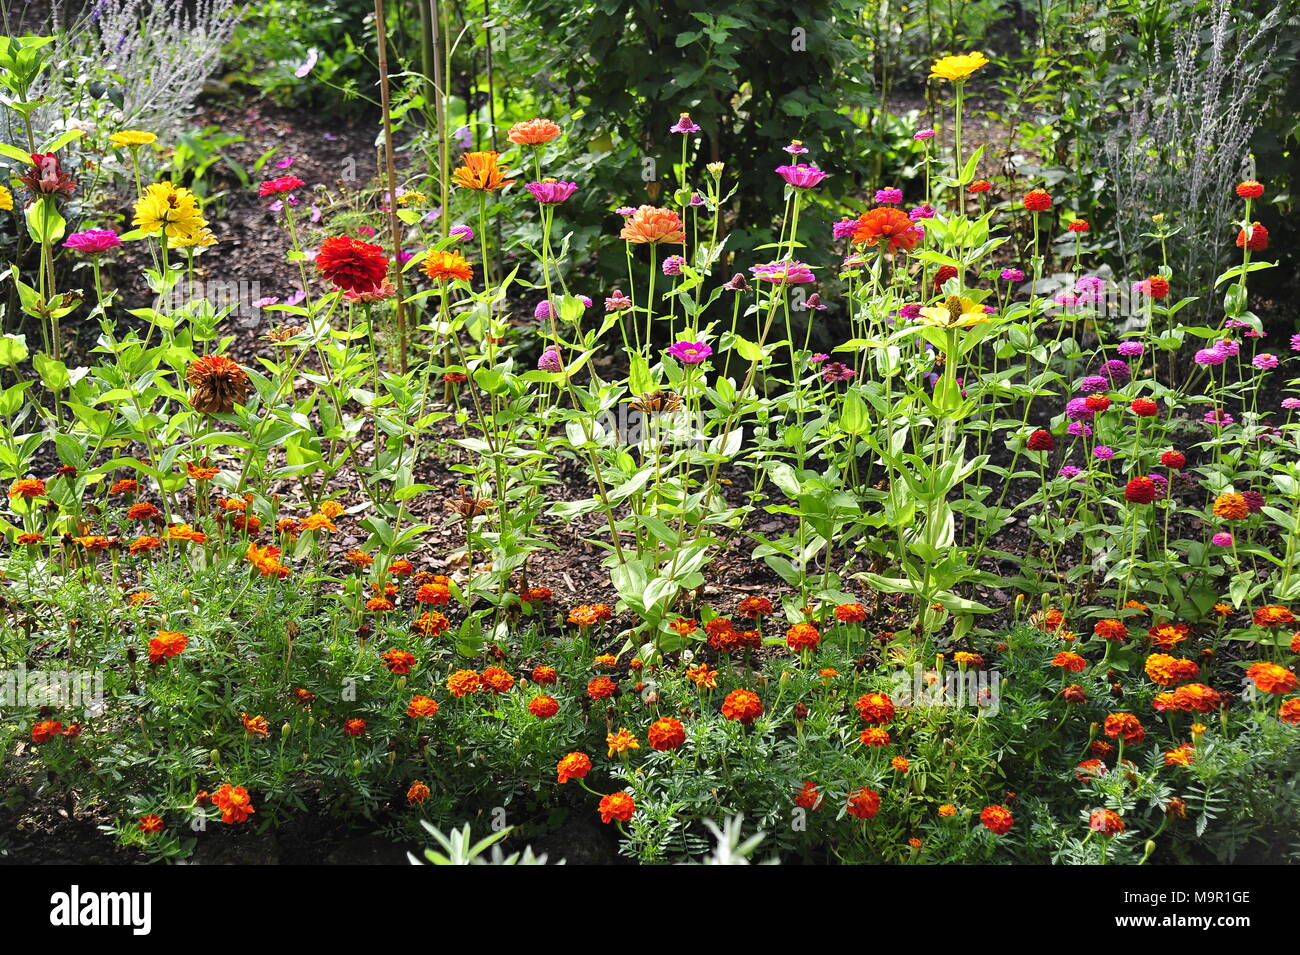 Flower garden with zinnias (Zinnia) and with Marigolds (Tagetes), Baden-Württemberg, Germany Stock Photo